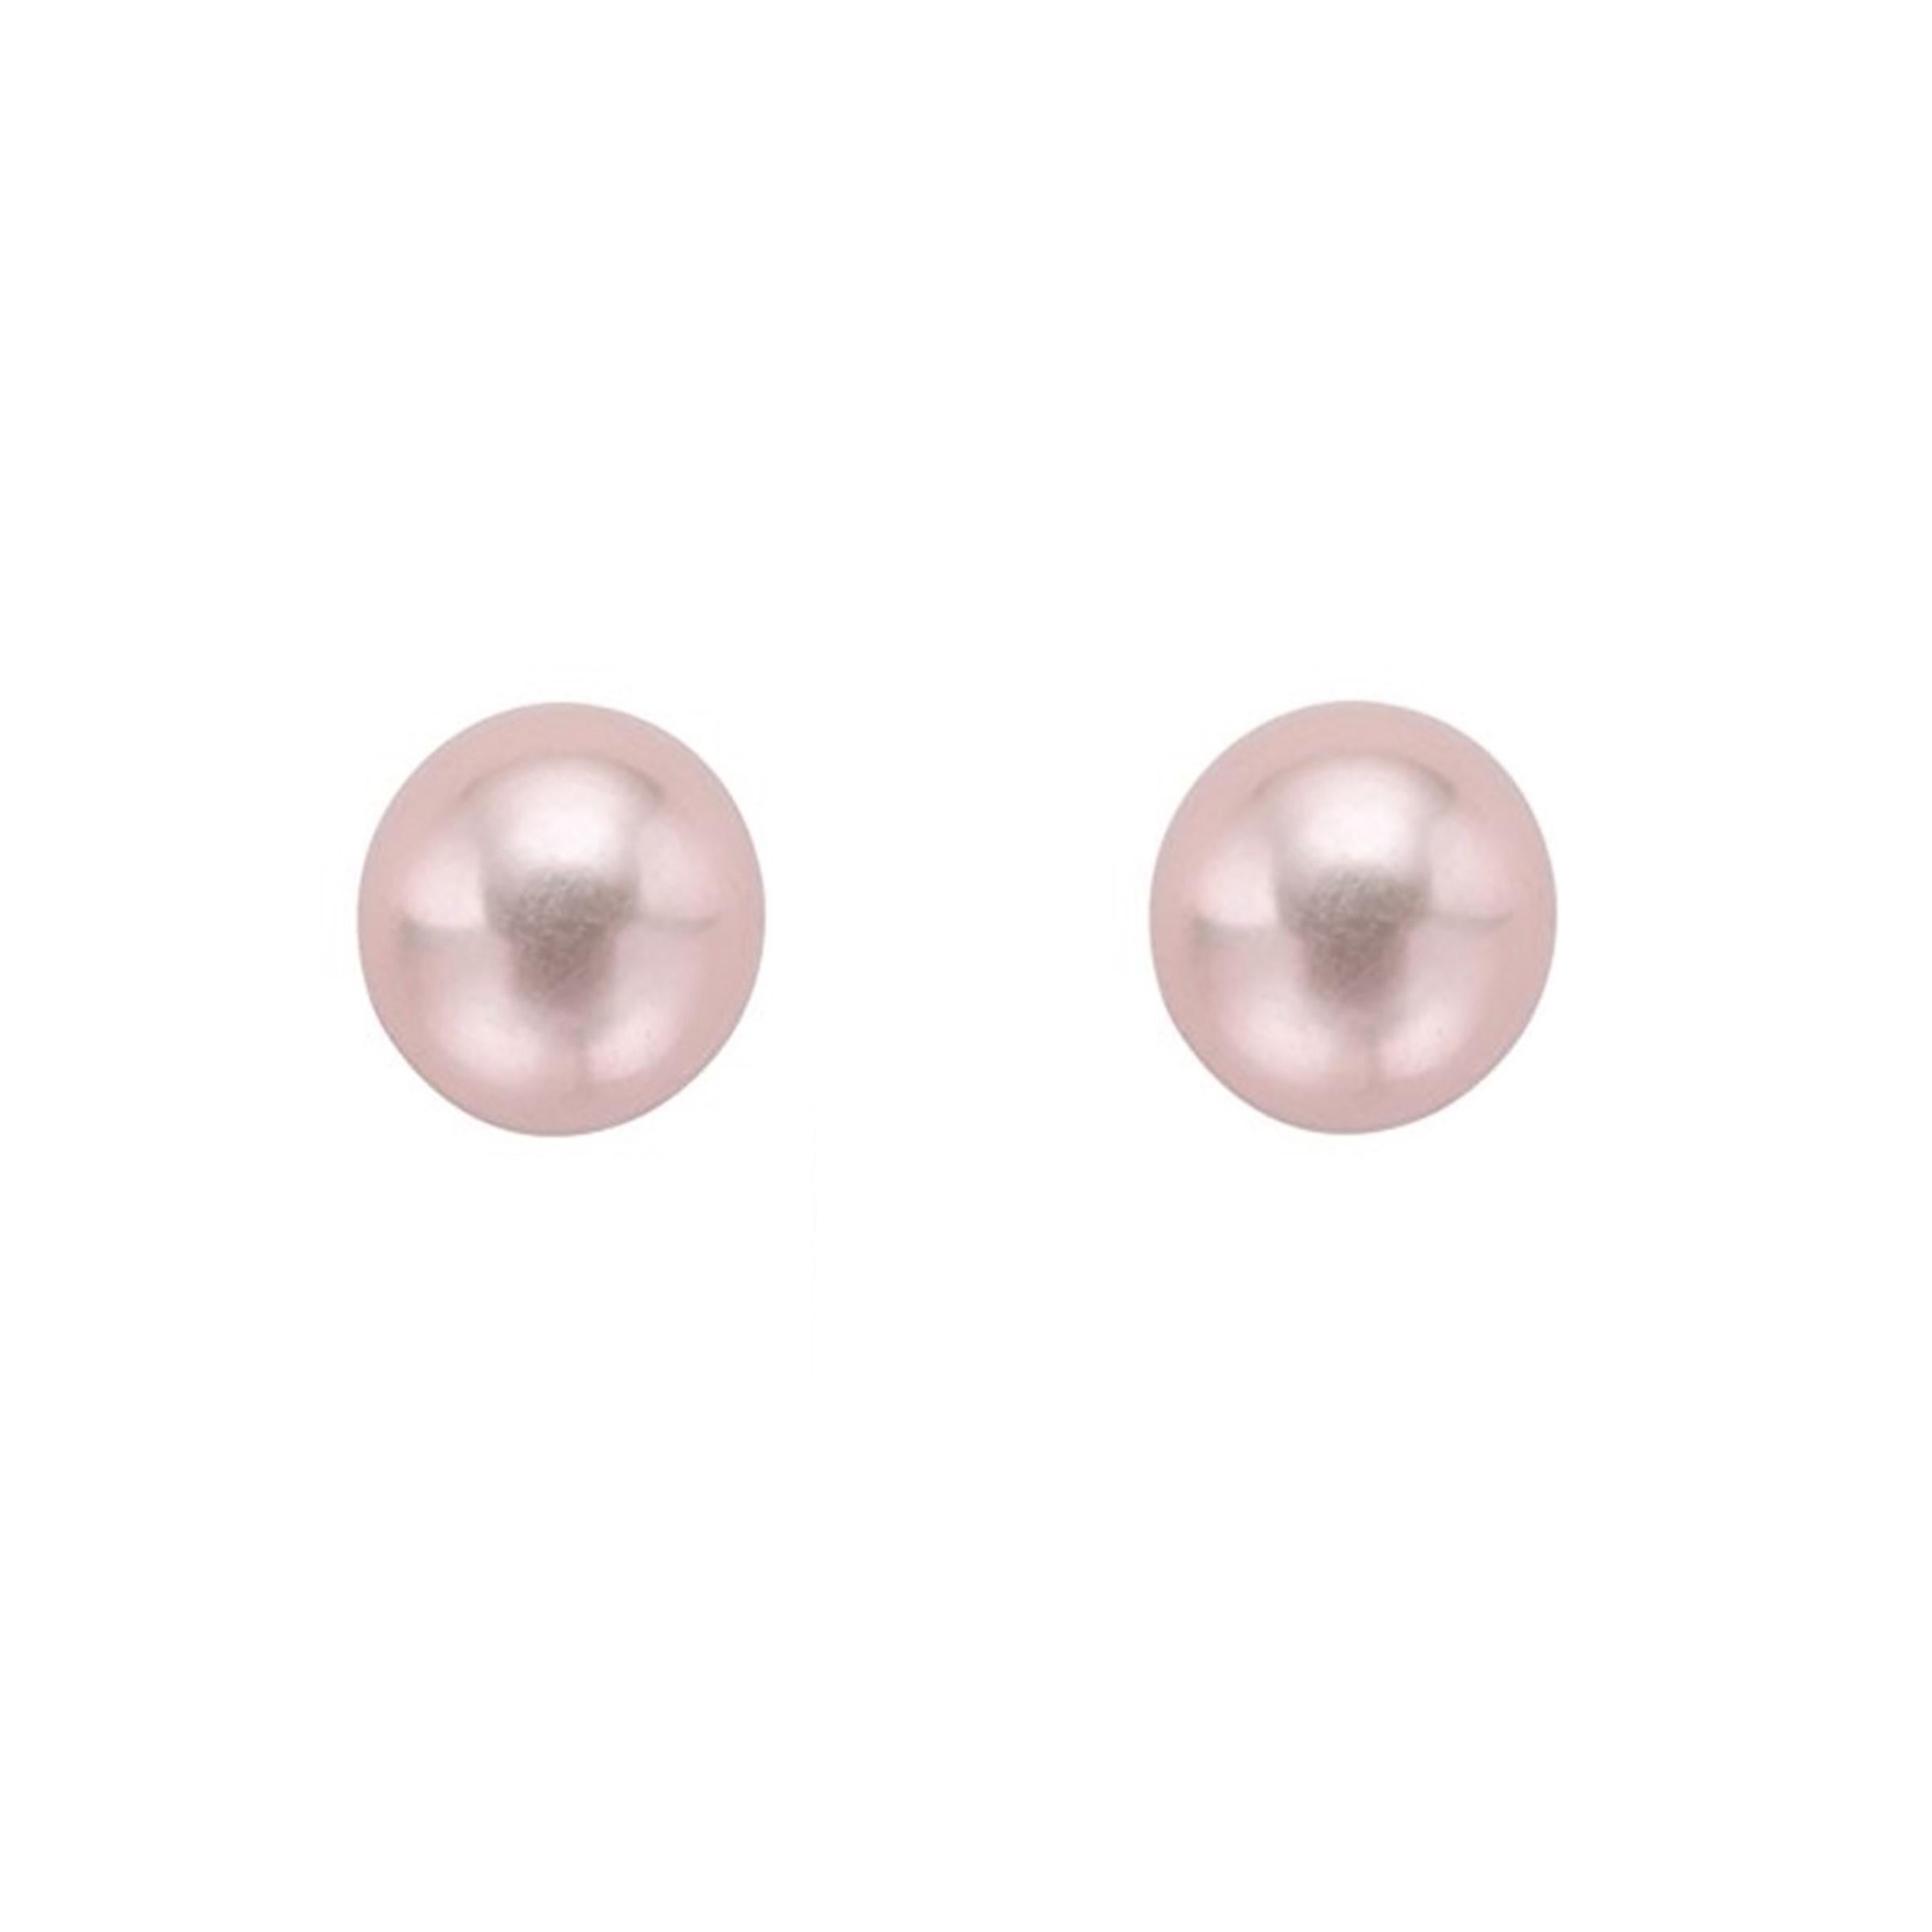 Simplicity and understated elegance have never made such a perfect combination. A beautiful pair of cultured freshwater pearls set on 14K yellow gold stud backings. The pearl earrings have a 'Very High' grade luster.

Pearl Type: Freshwater